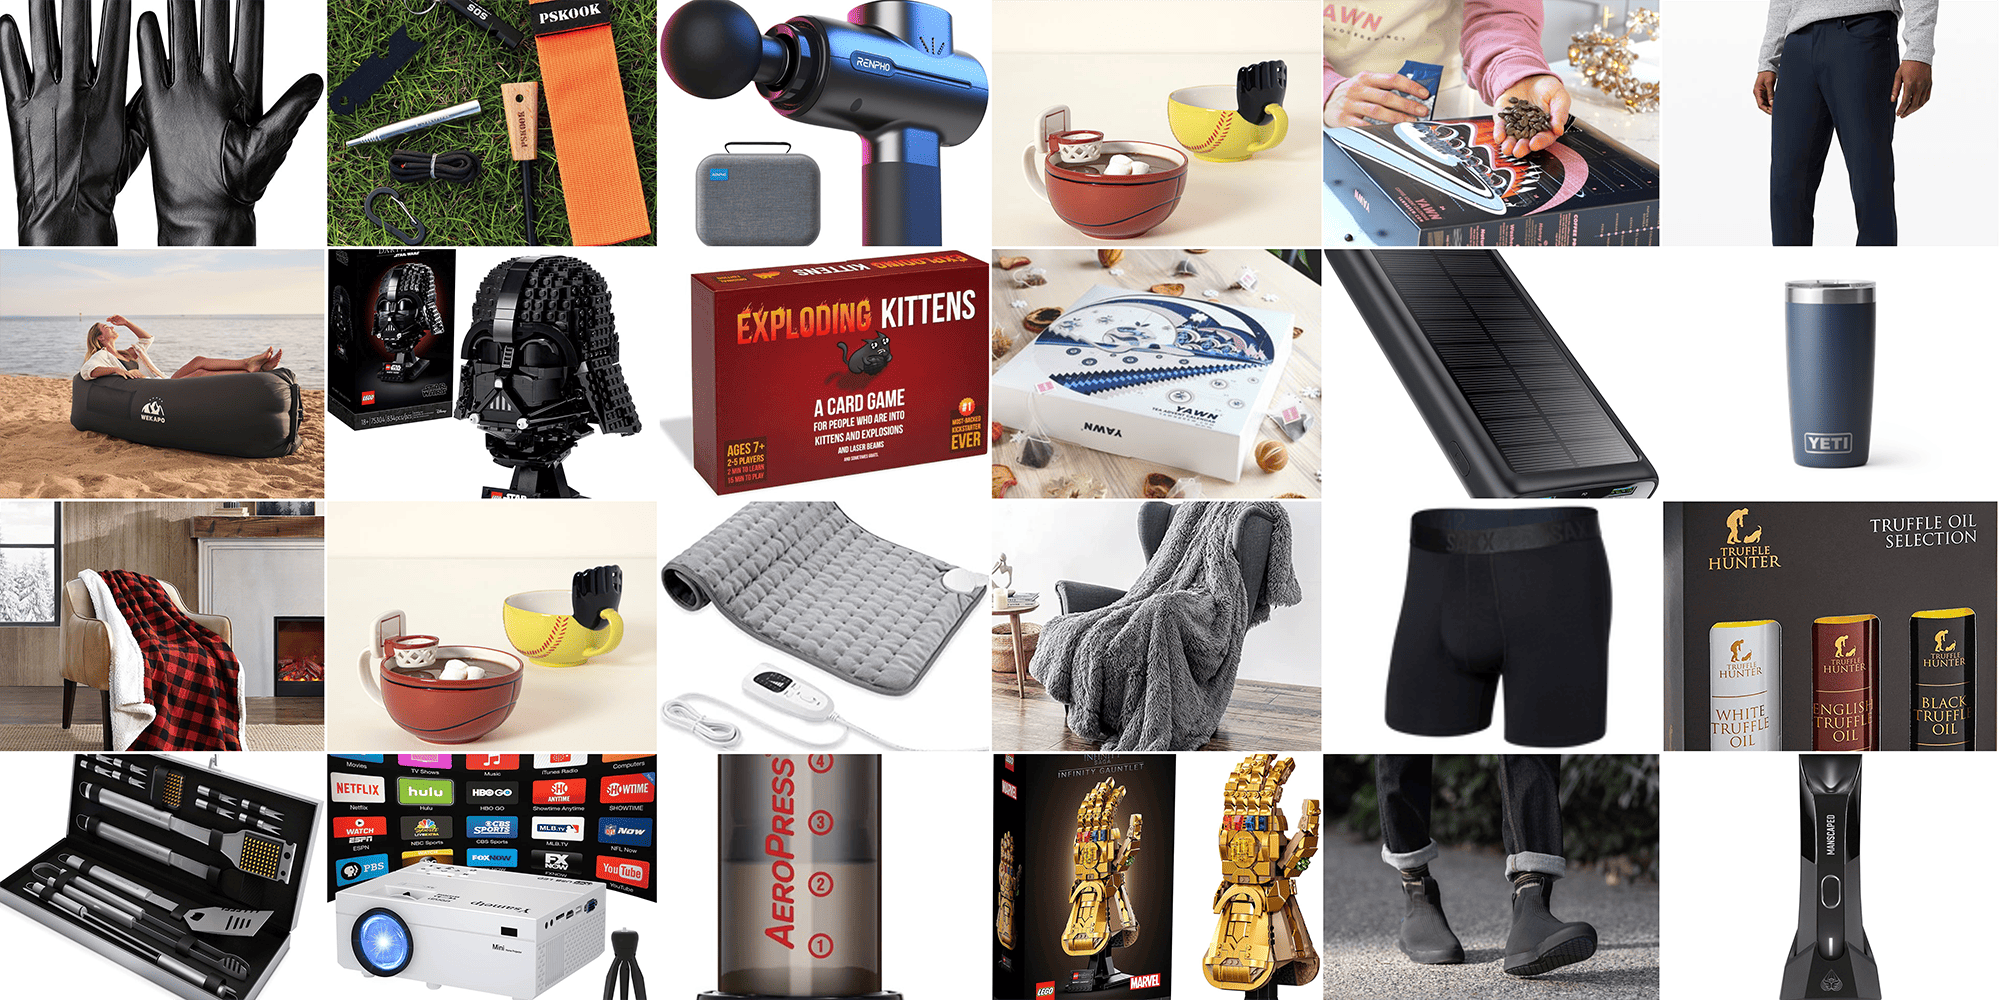 34 Best Gift Ideas For Men That He'll Actually Love [GUIDE]